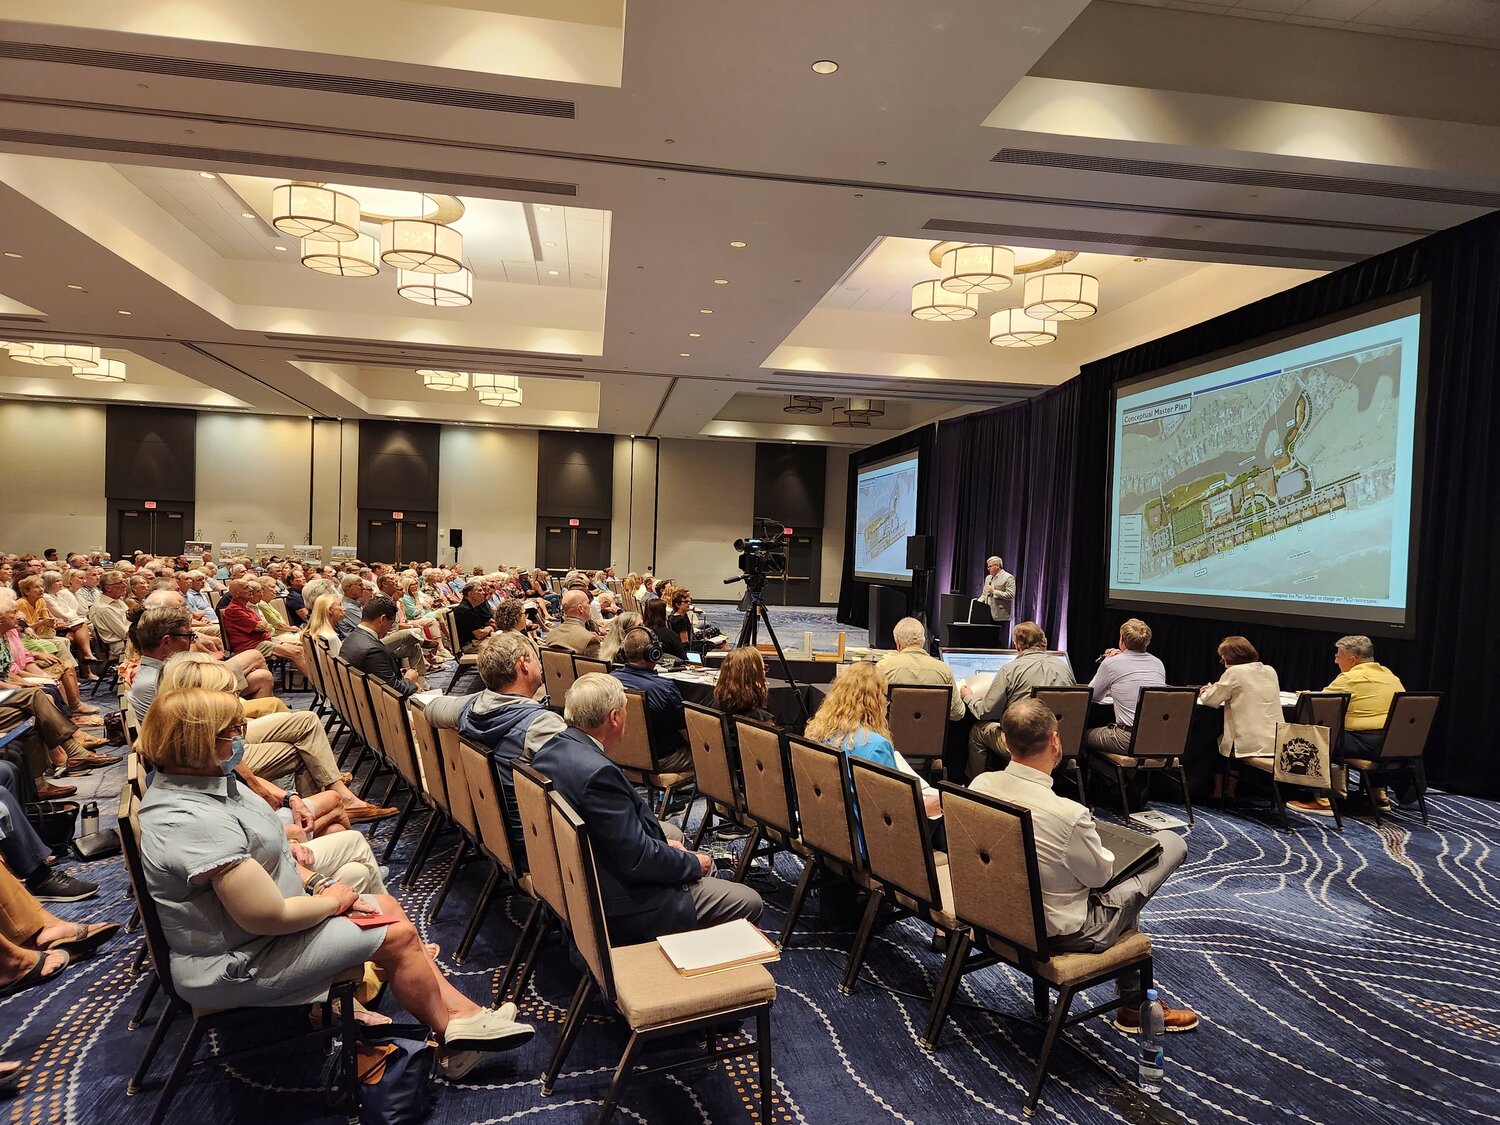 The Ponte Vedra/Palm Valley Architectural Review Committee held its meeting to discuss the Ponte Vedra Inn & Club’s proposed 30-year development and renovations plan during its meeting on Sept. 6. The meeting was held at the Sawgrass Marriott due to the amount of interest surrounding it among residents.